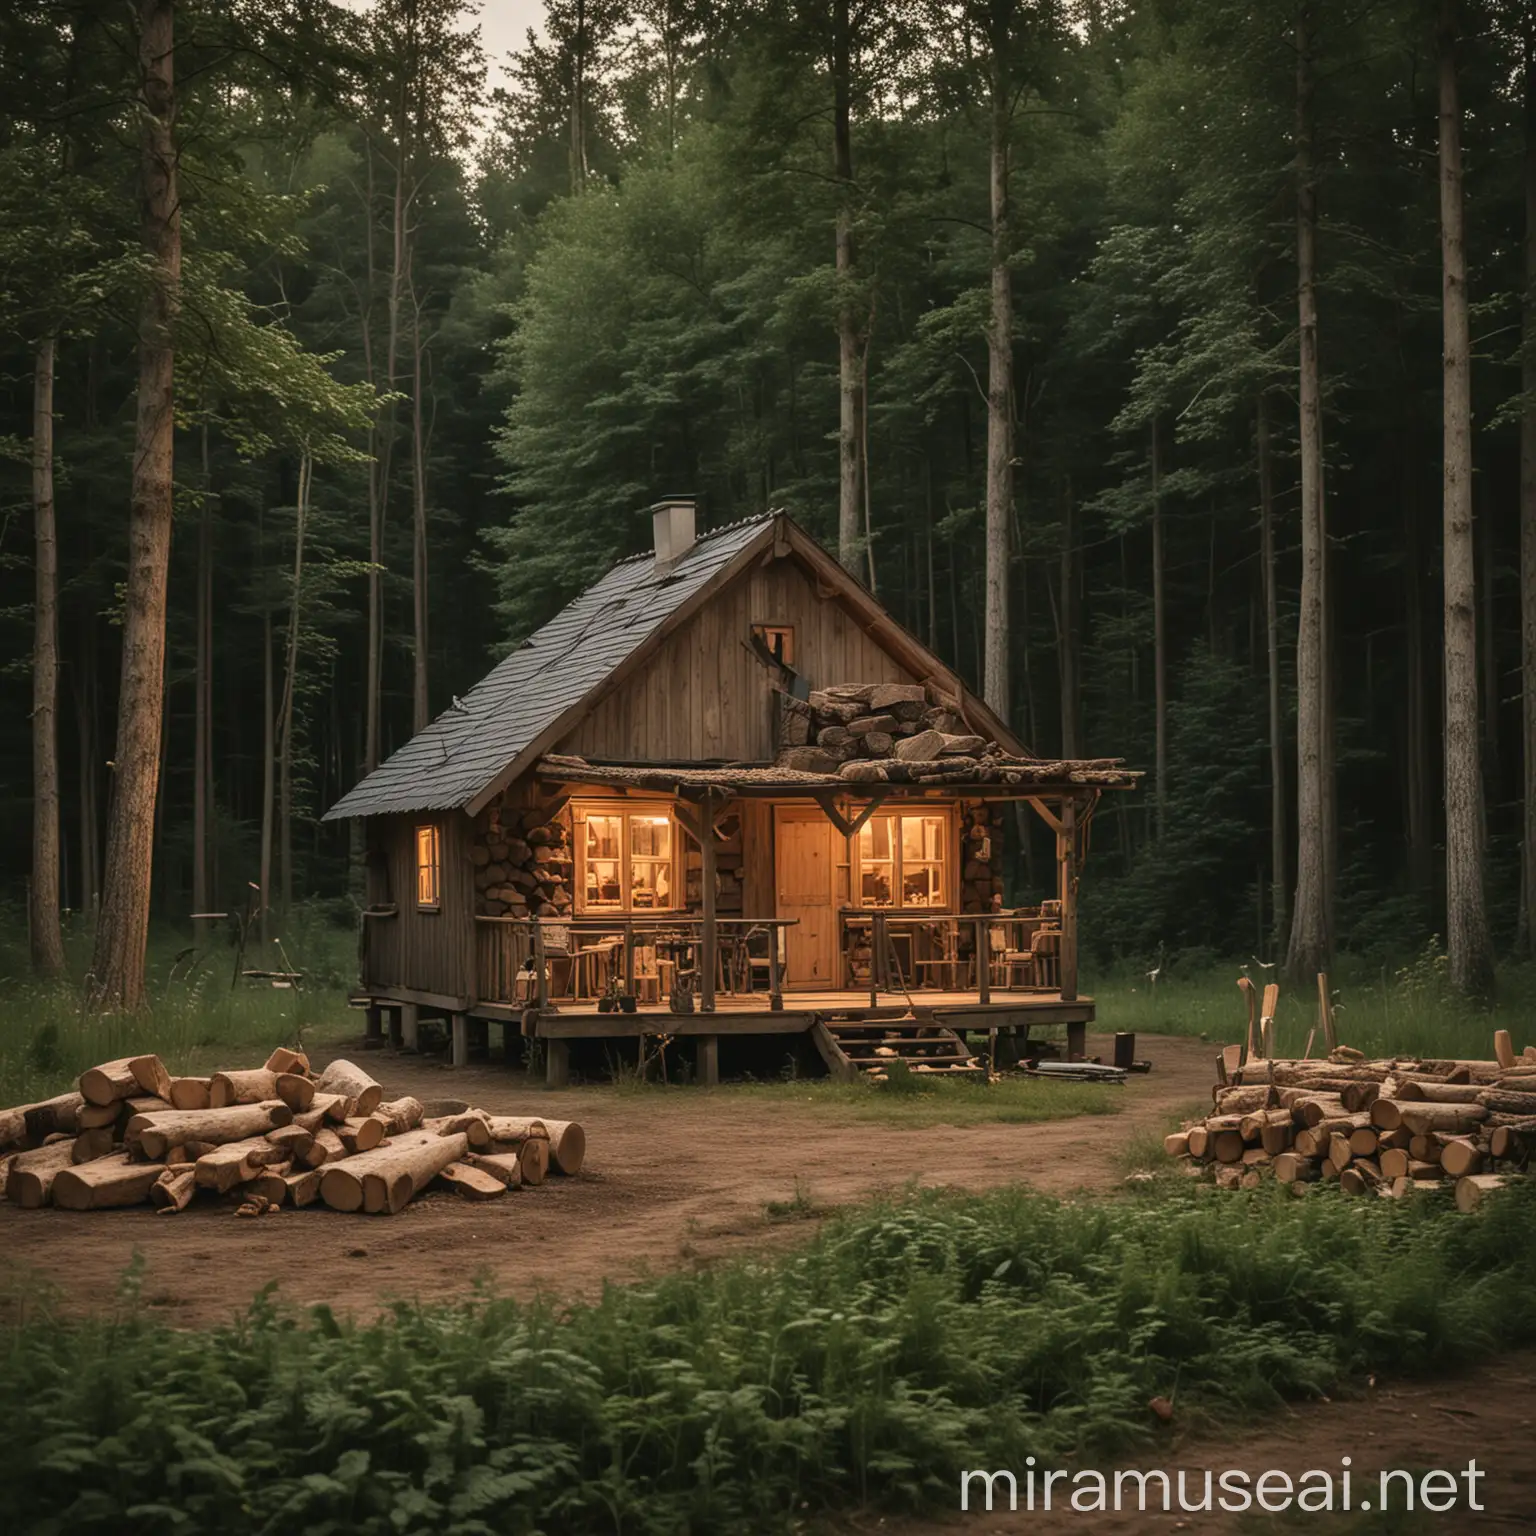 Wood Chopping Scene at Dusk Rustic Cabin in Summer Forest Setting